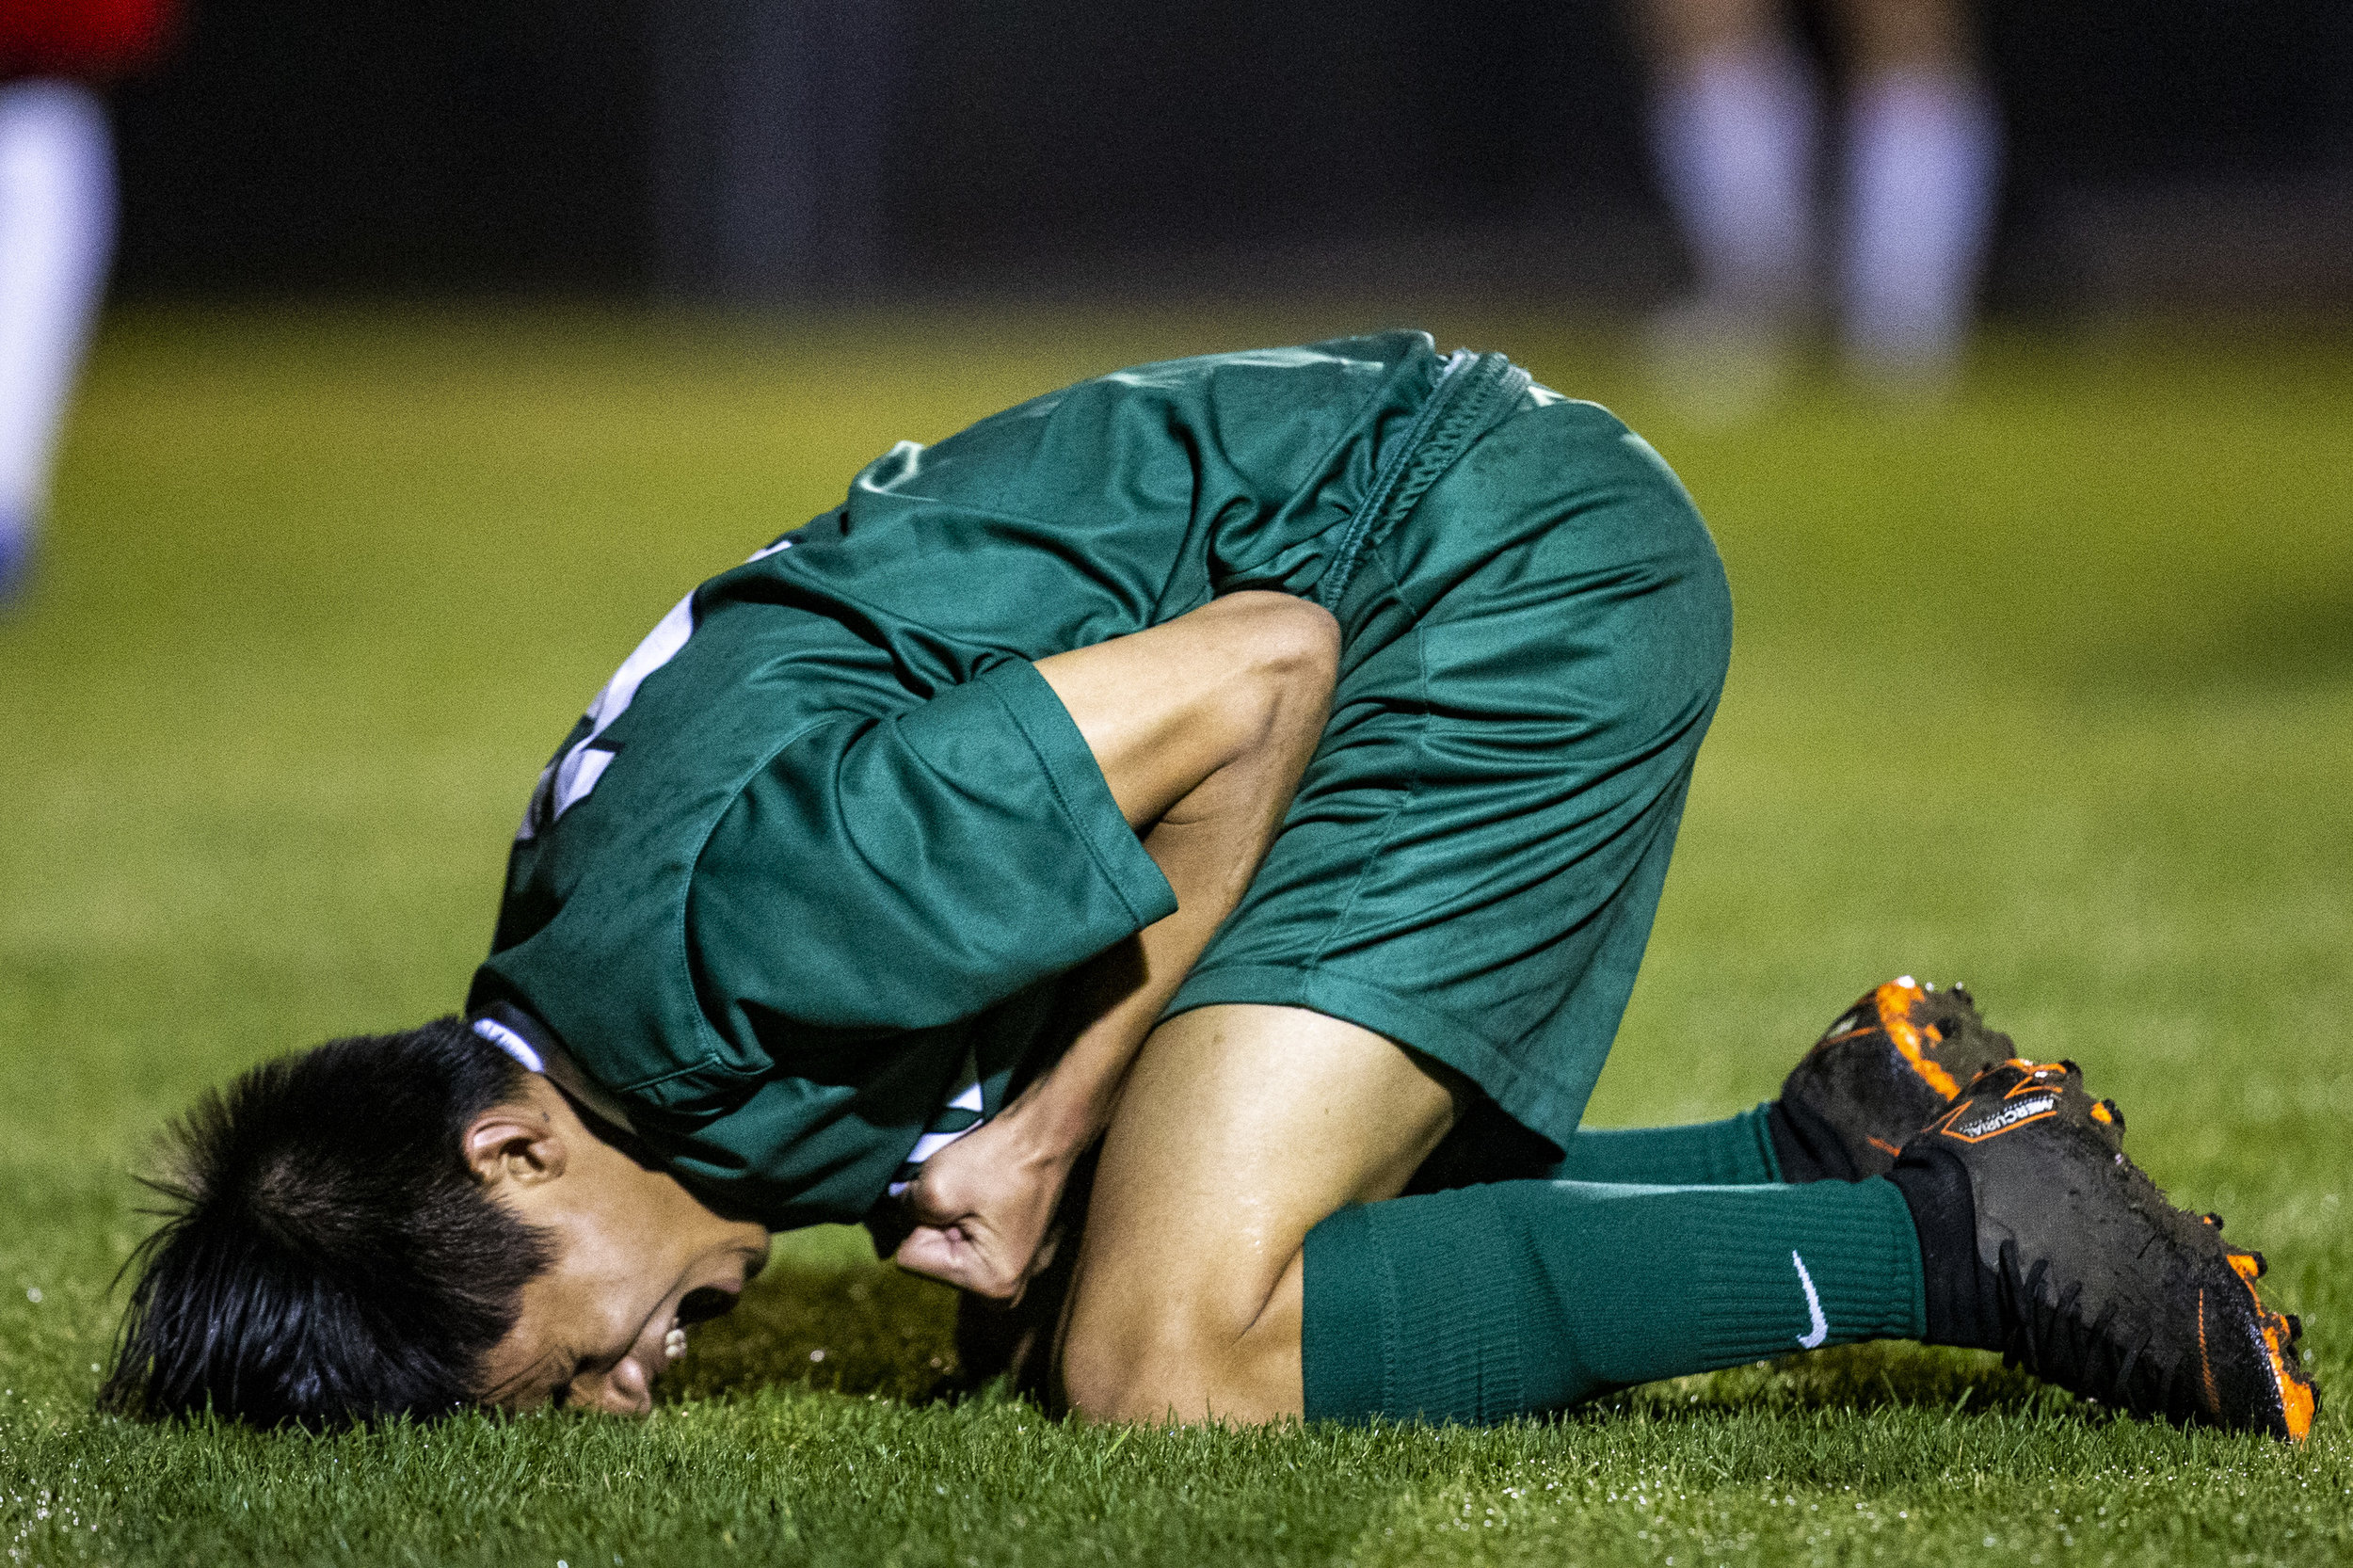  Eastside's JJ Romaraog reacts after missing a goal while the game is tied during the Region 2-3A quarterfinal match at Citizens Field on February 6, 2019. The Eastside Rams beat the Pierson Taylor Wildcats 4-3. 